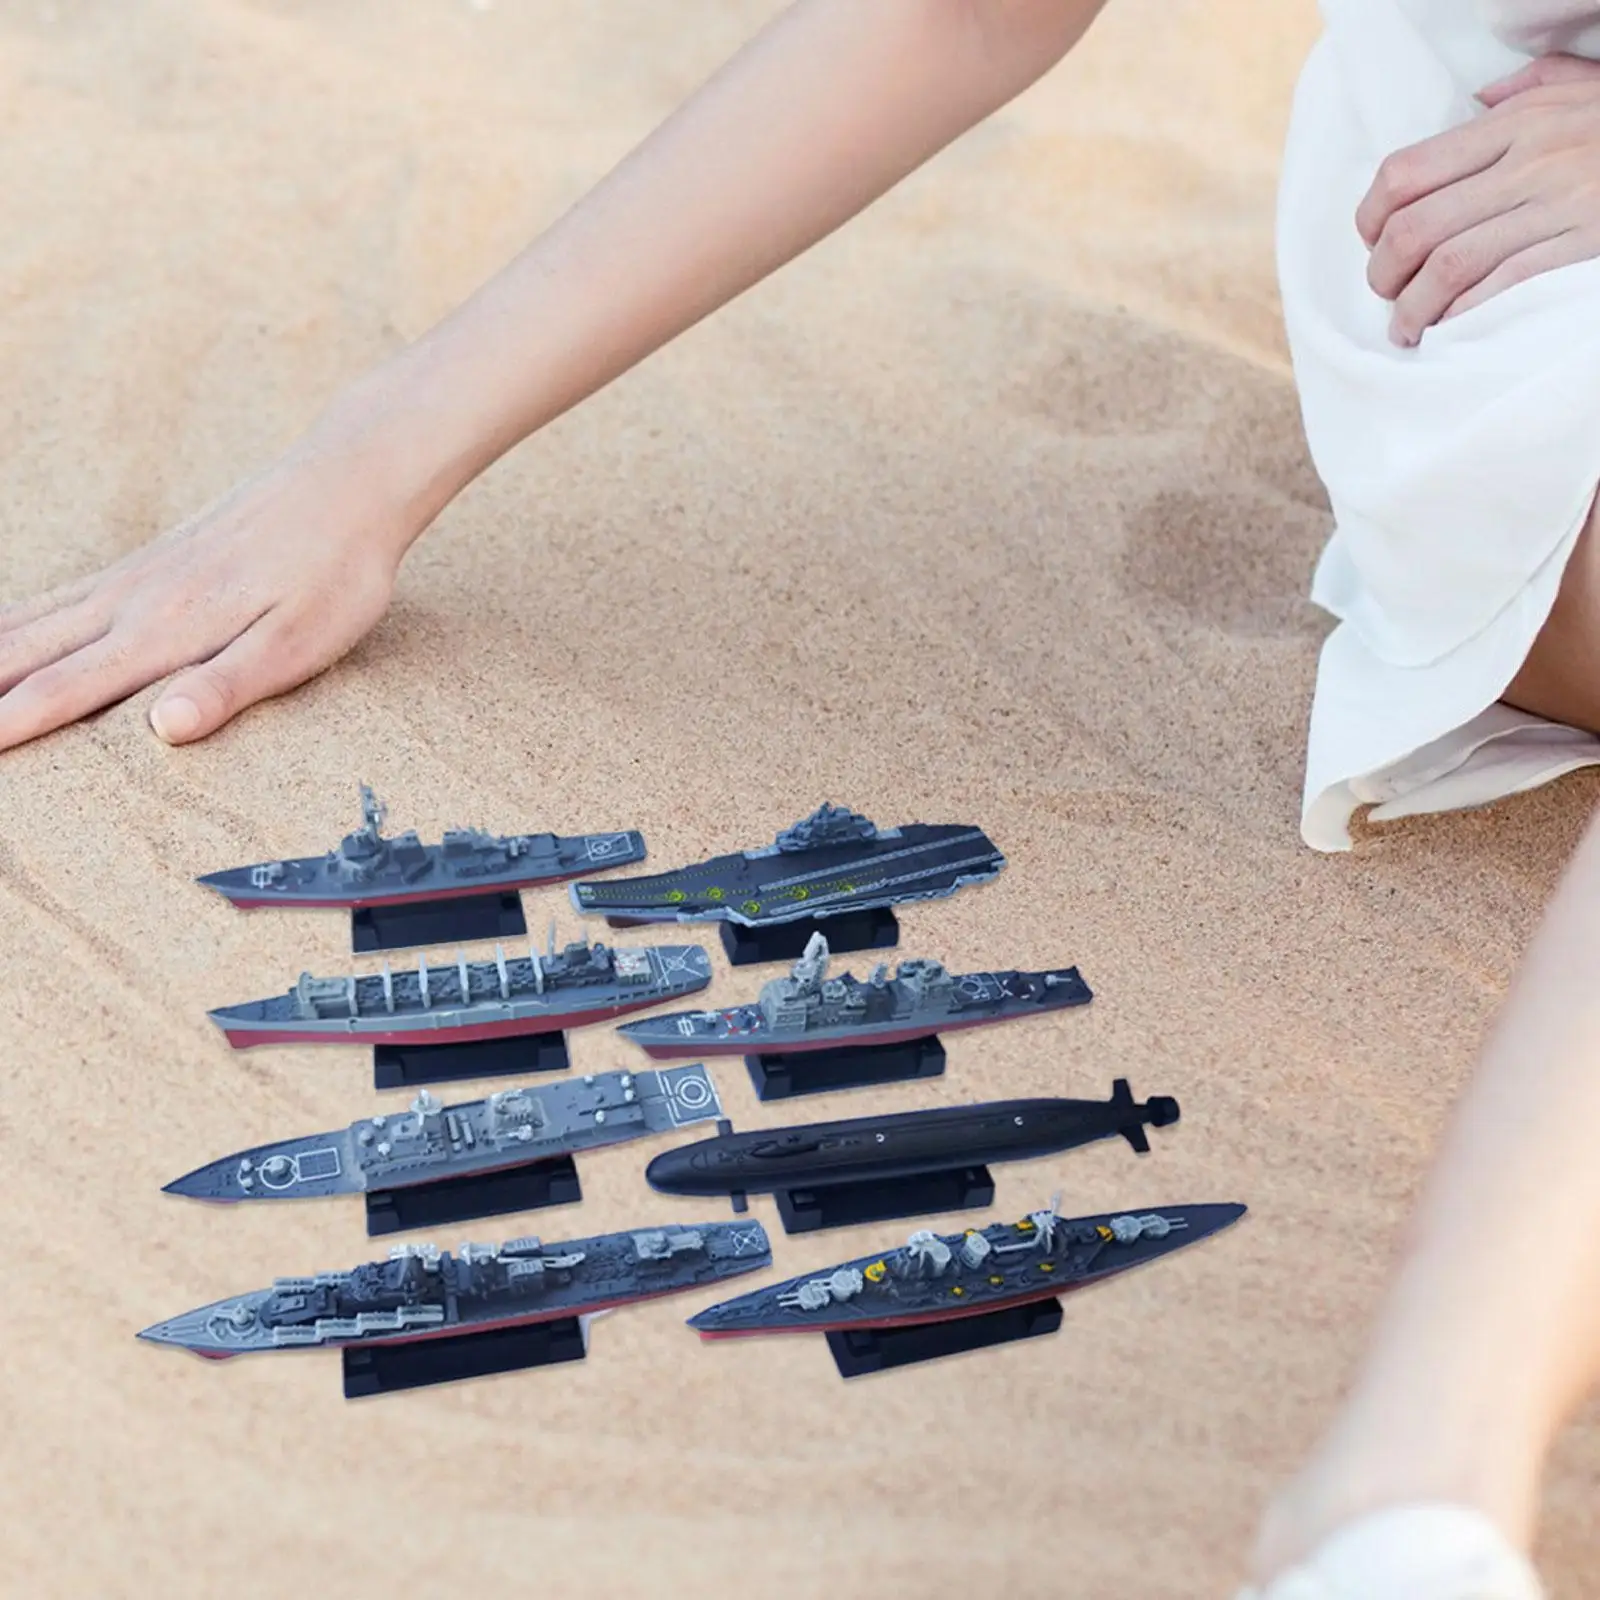 8 Pieces Aircraft Carrier Toy Model Simulation Submarine Naval Ship Playset Unfinished Craft Hobby Puzzles for Party Favors Kids